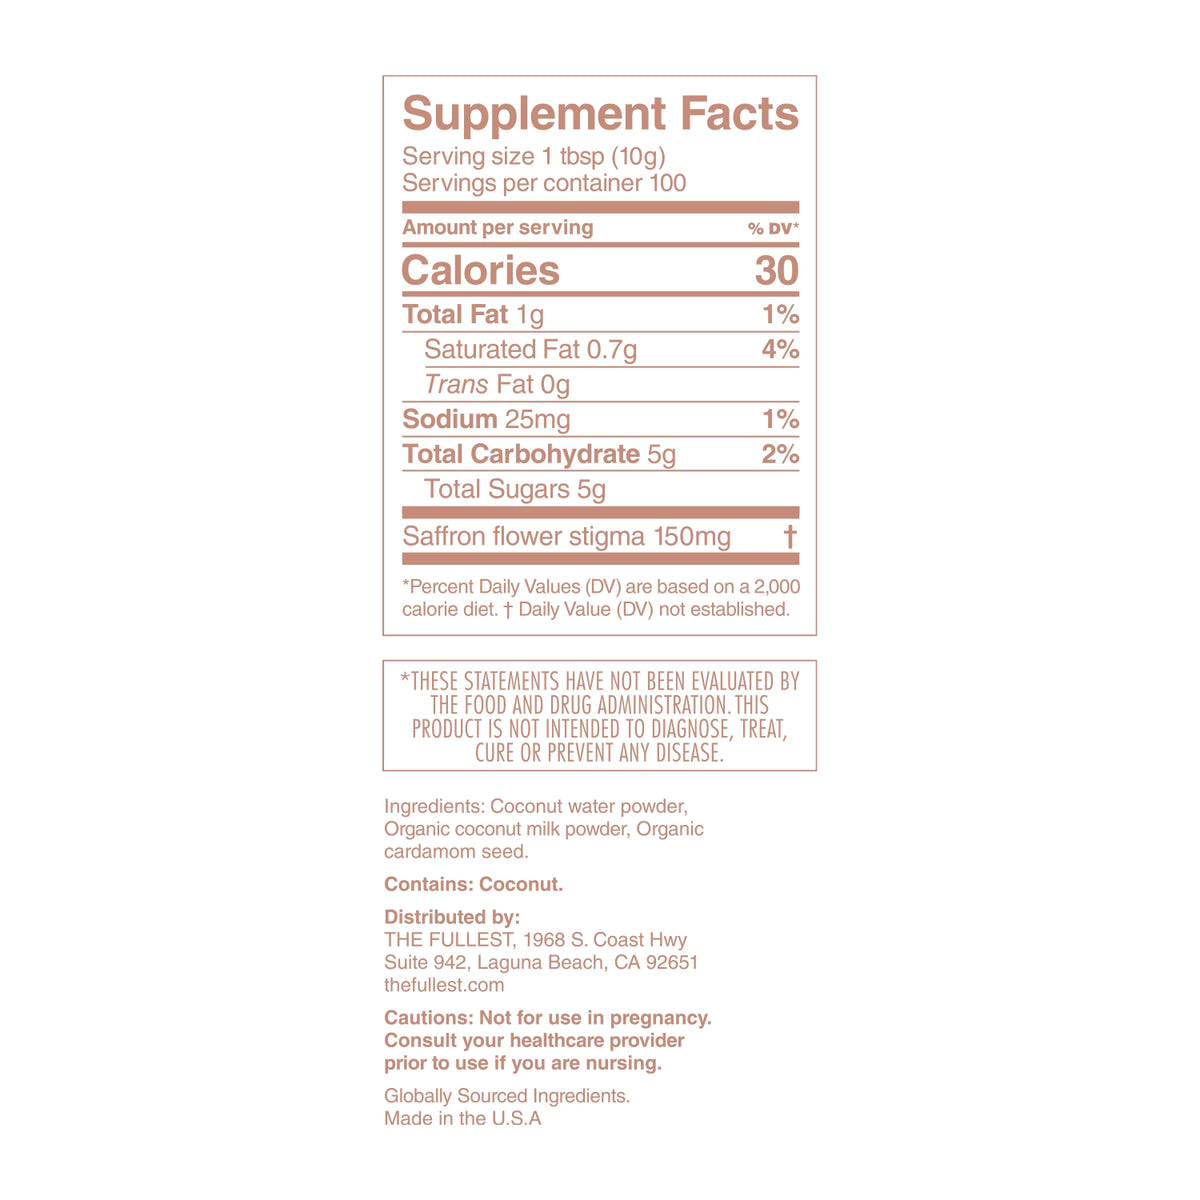 Nutritional fact label showing serving size, calories, and a list of ingredients for a caffeine-free Warm Feelings Sachet latte food product by THE FULLEST.